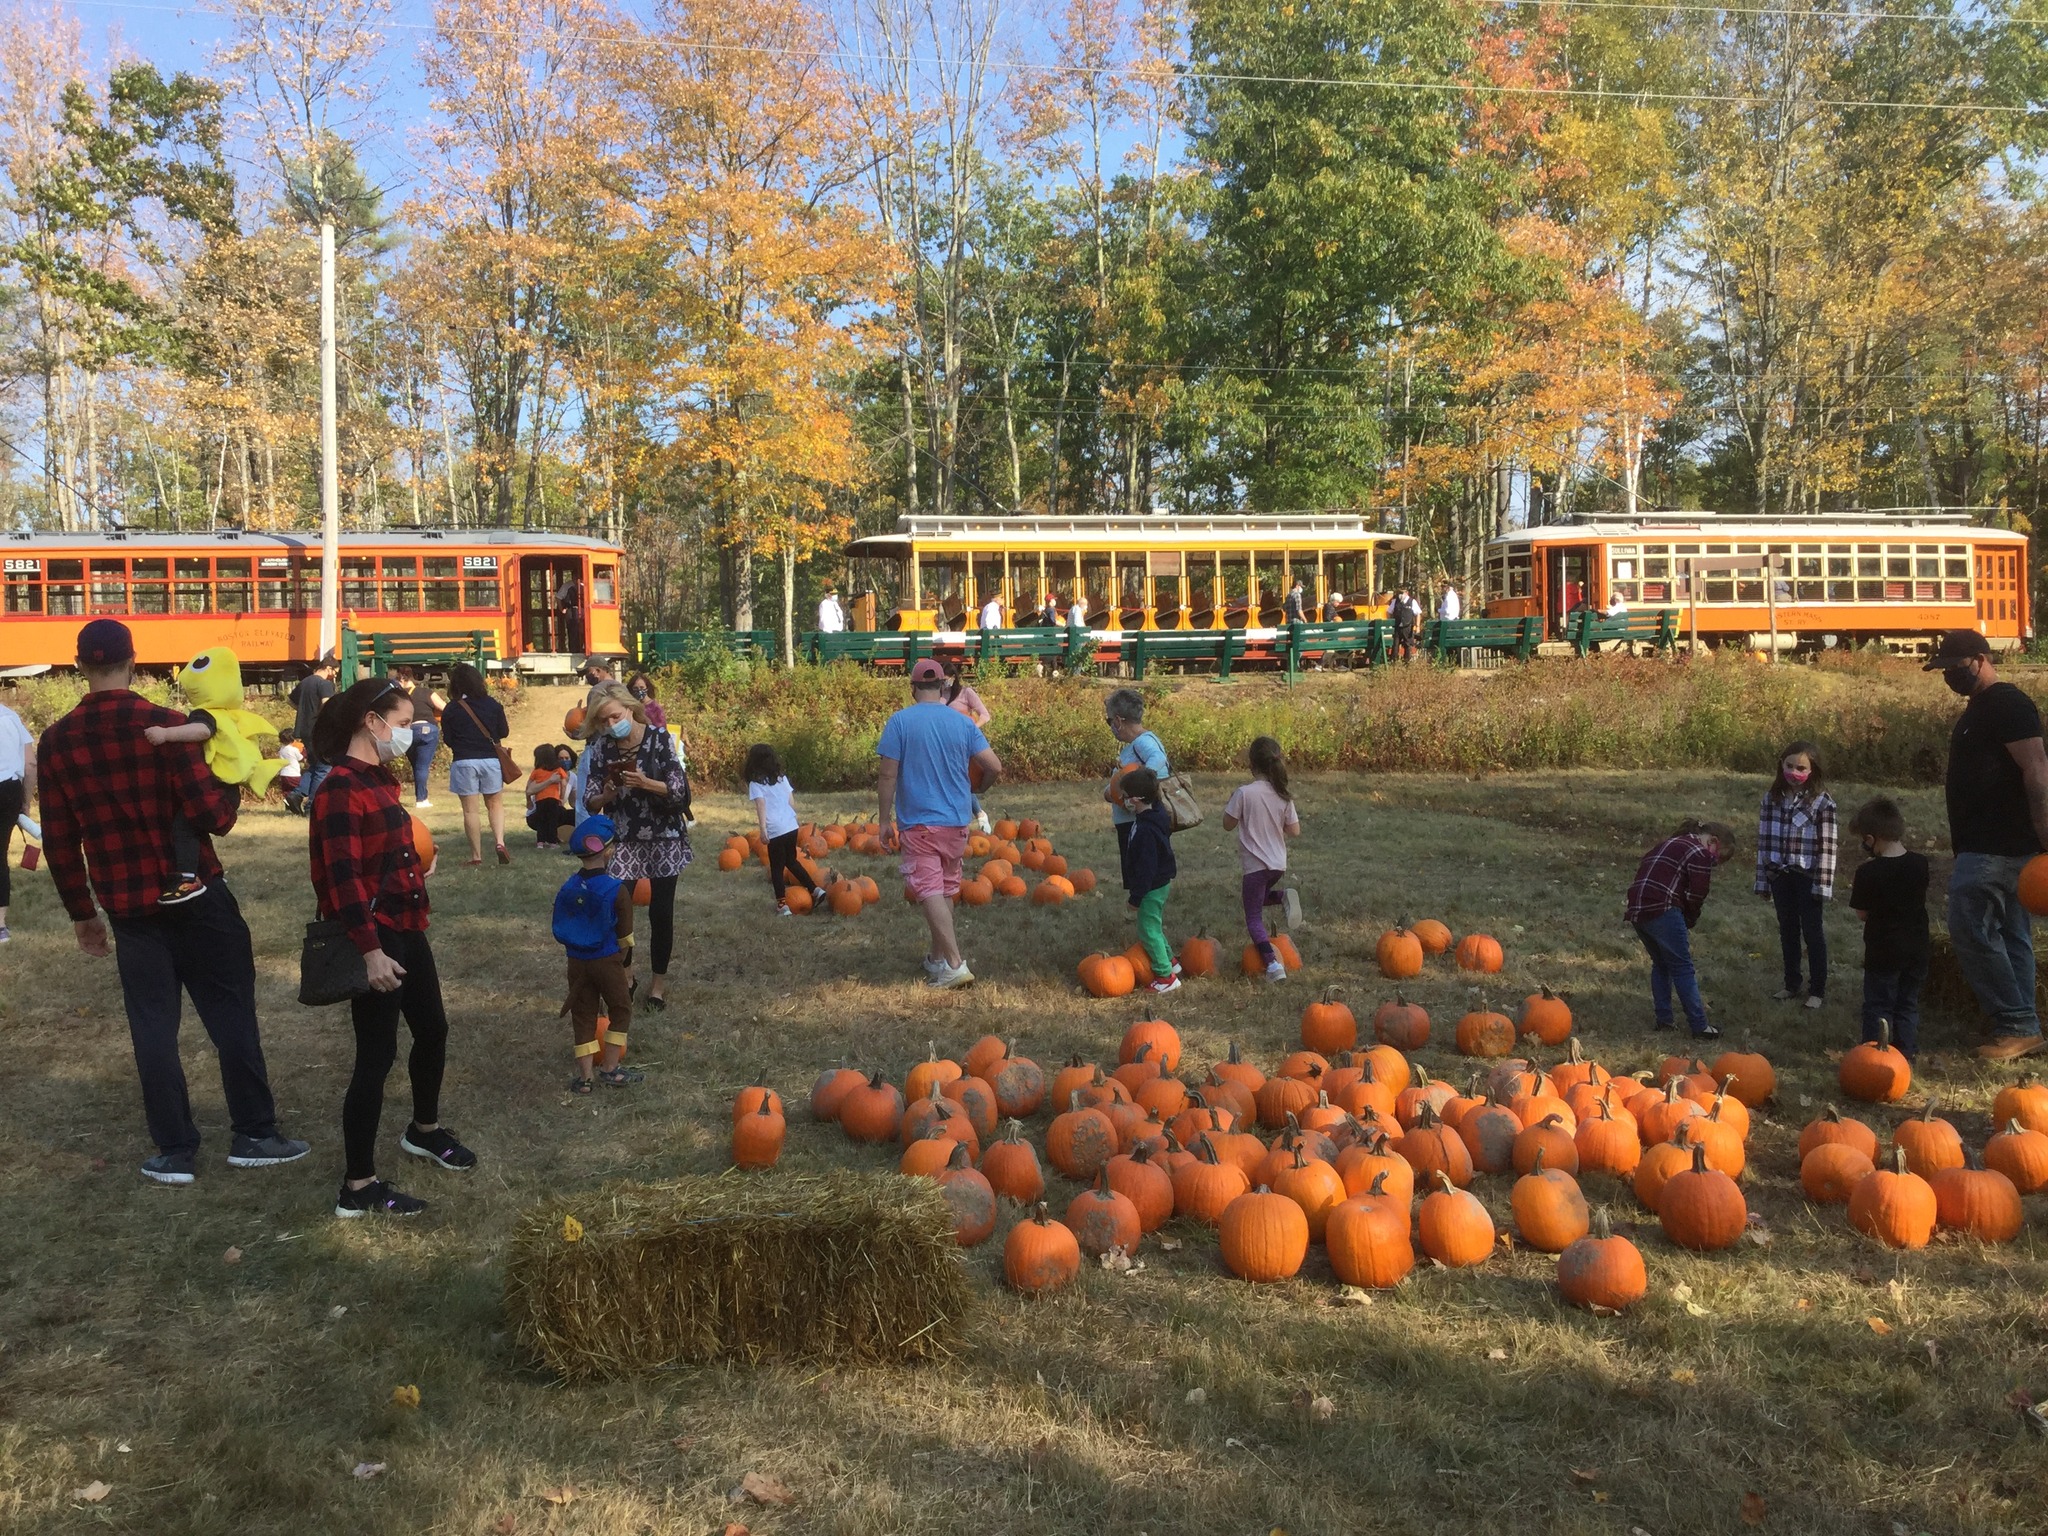 A family selects pumpkins at Seashore Trolley Museum’s pumpkin patch, fall 2020.